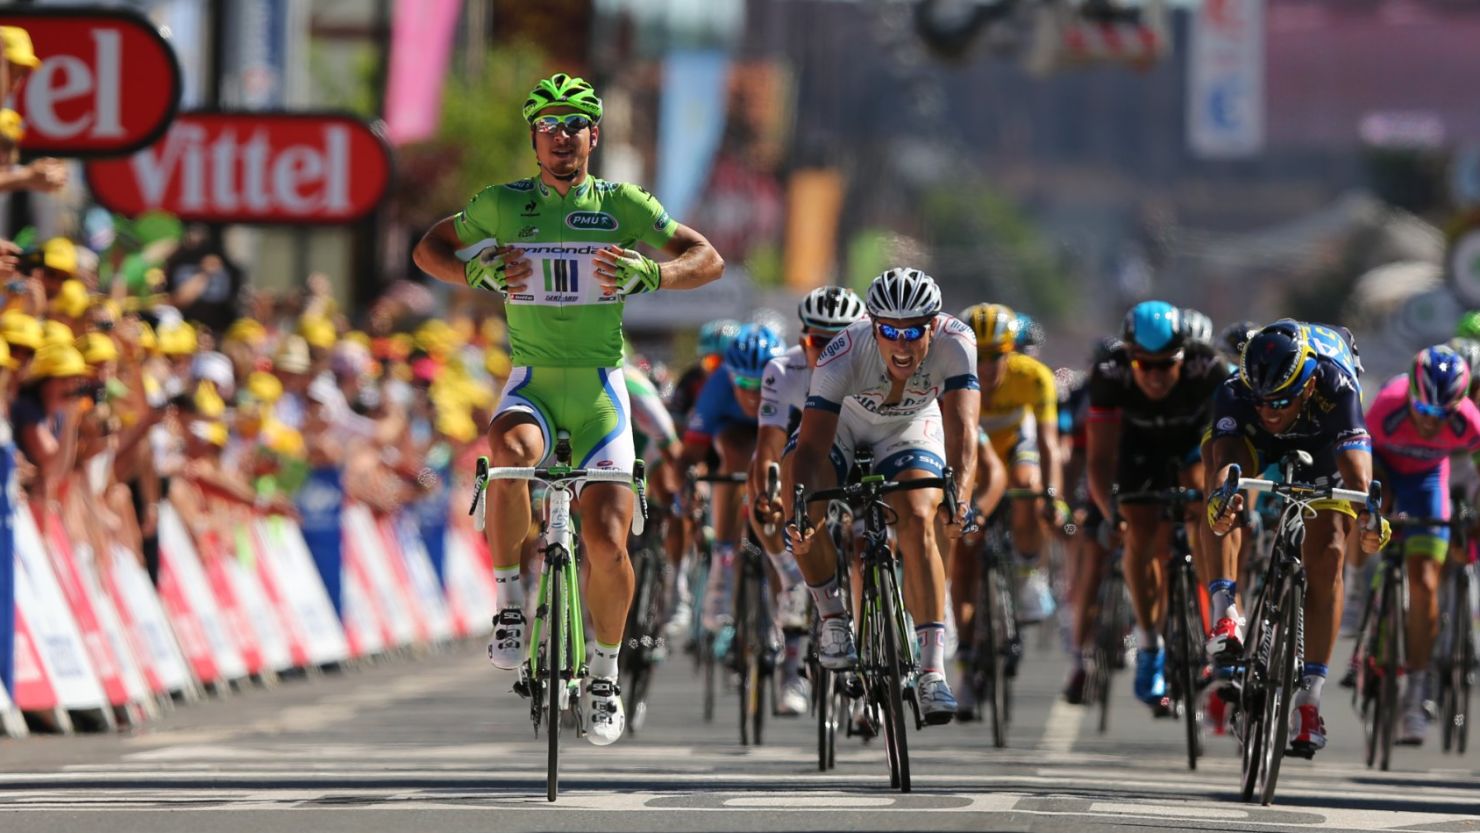 Peter Sagan has time to sit up as he takes the seventh stage of the Tour de France in Albi.